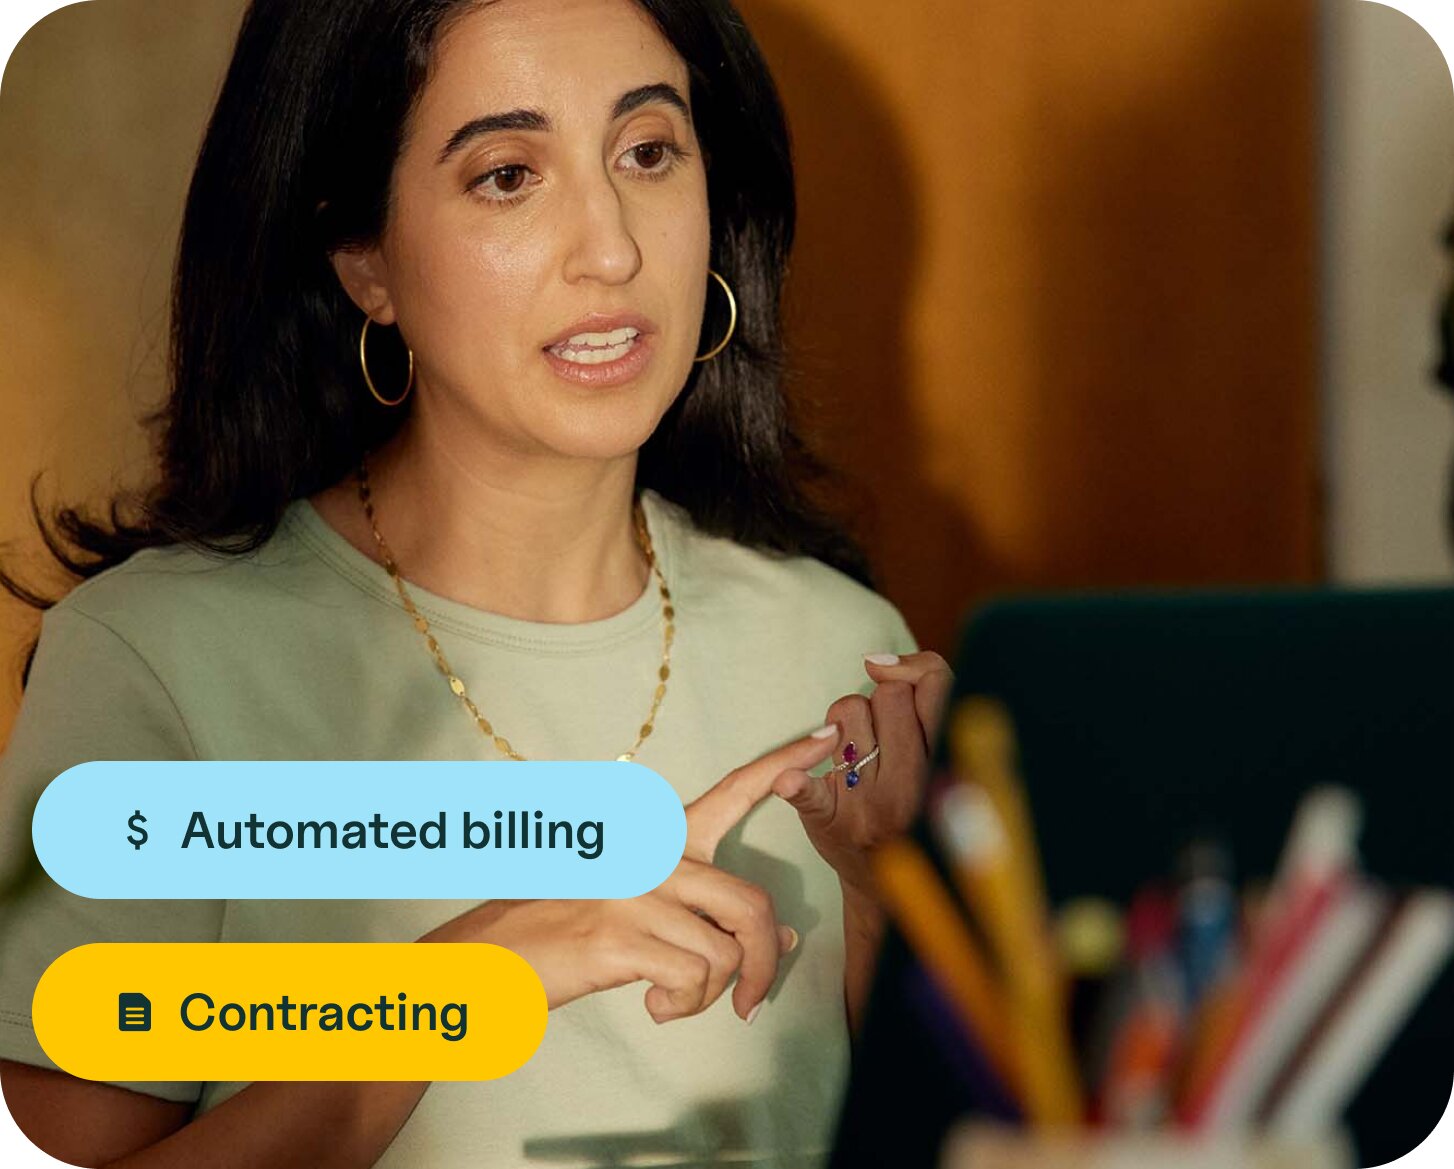 woman talking in a therapy session with text overlays that state "Automated billing" and "Contracting"